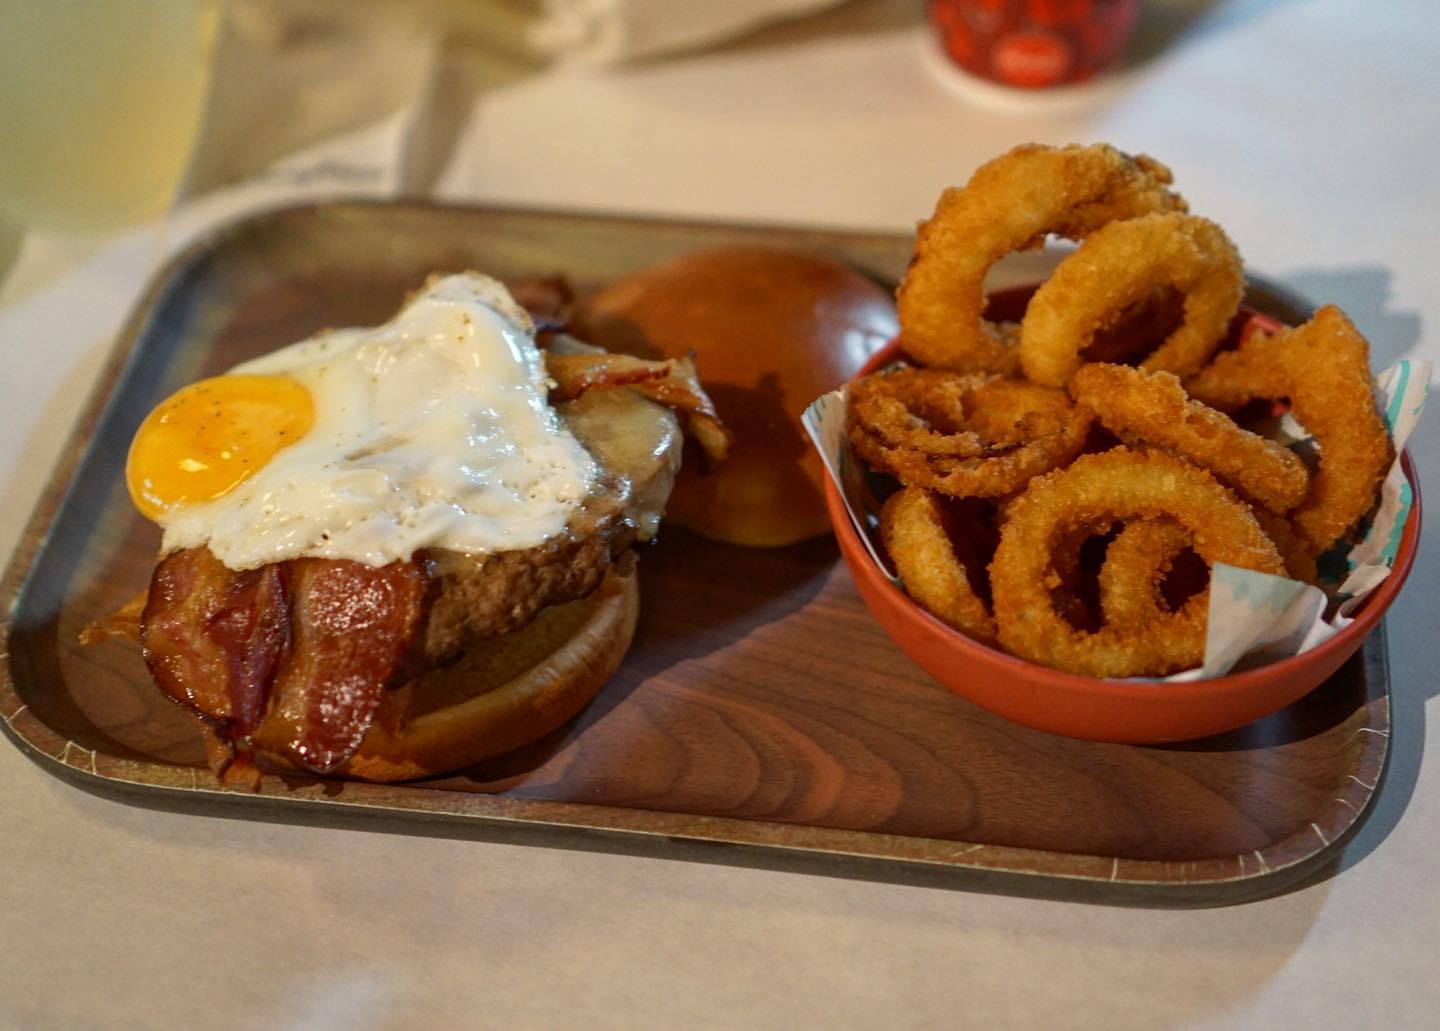 The Sunny-Side Up Burger and Onion Rings